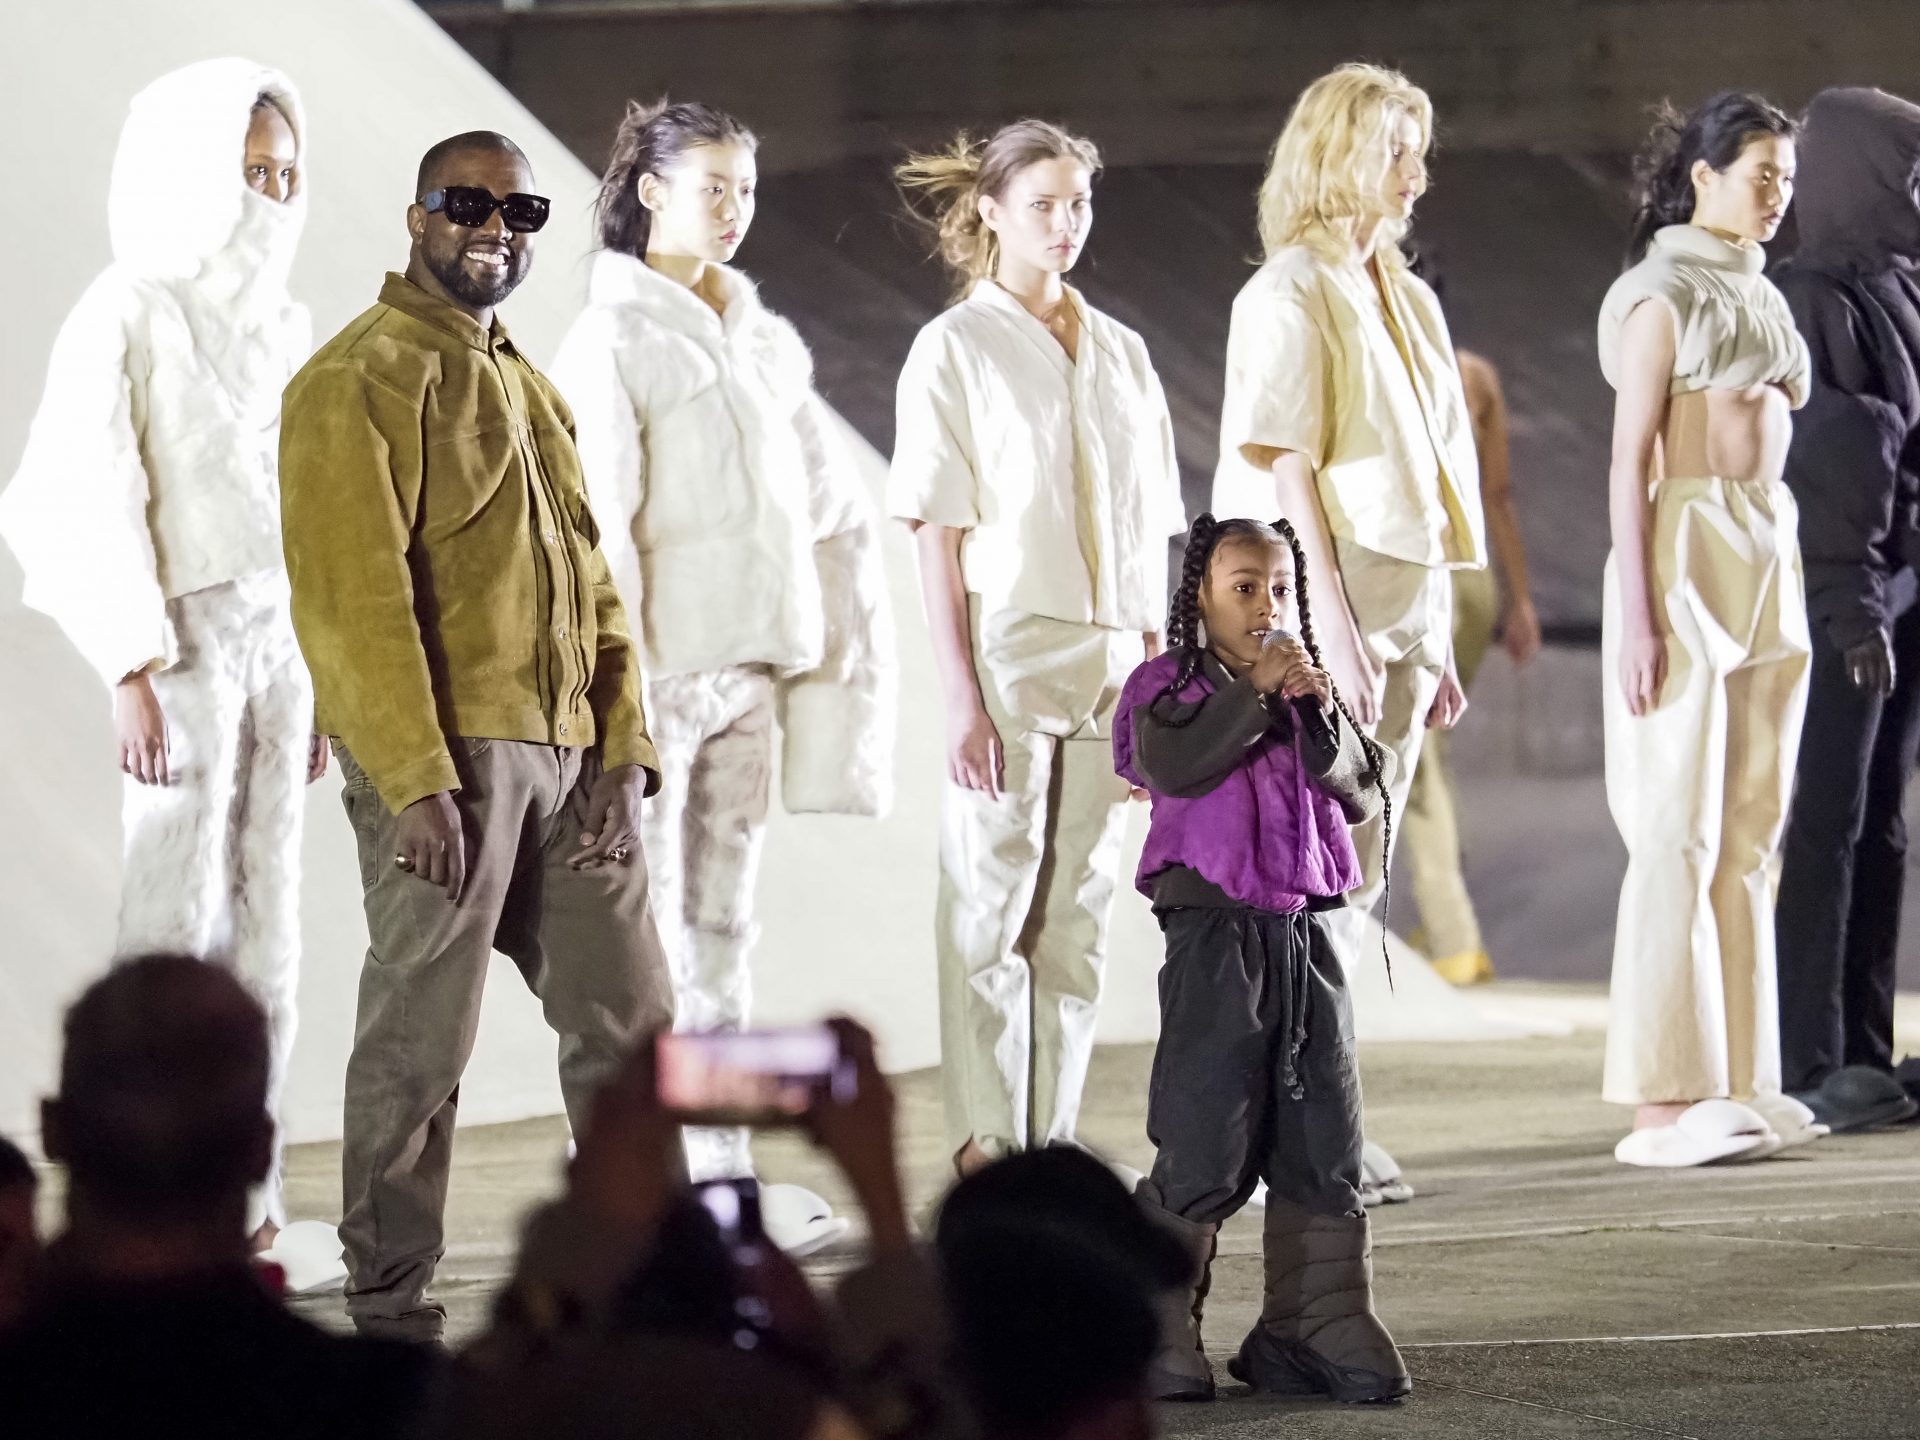 Kanye West and daughter North West on the runway of the Yeezy fashion show during Paris Fashion Week (Photo by Arnold Jerocki/GC Images)